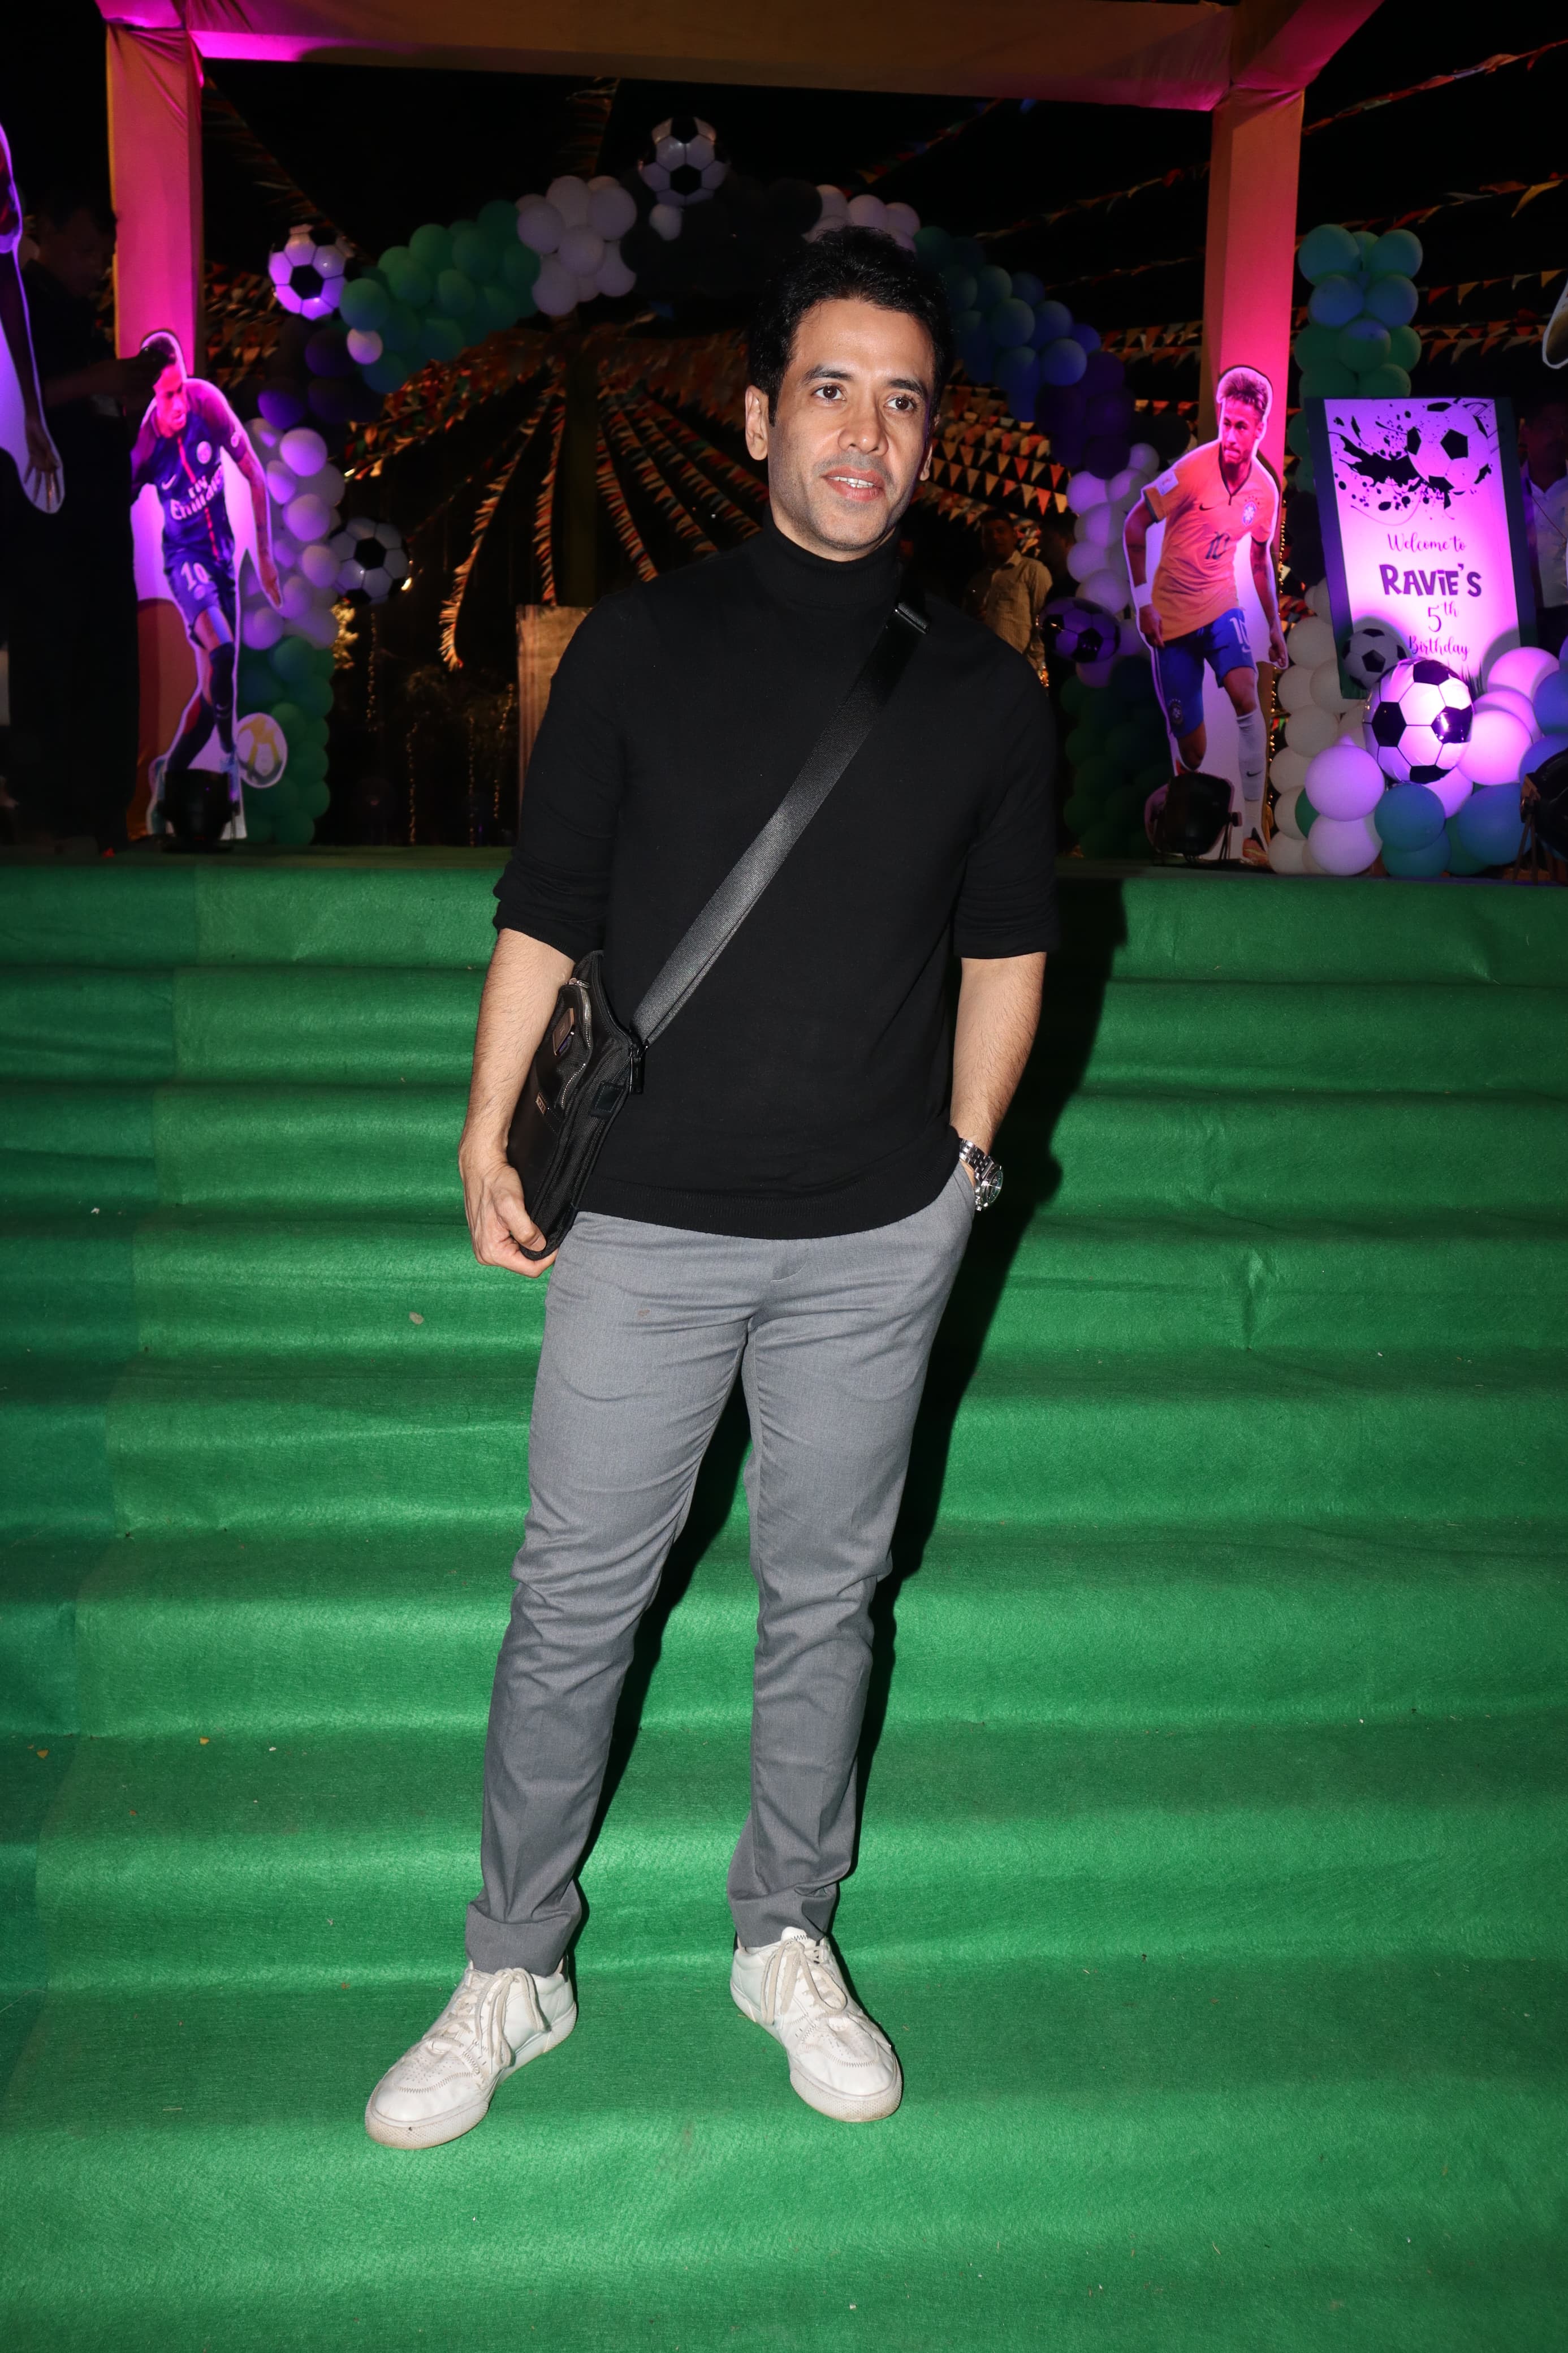 Tusshar Kapoor, the proud uncle, was smiling ear to ear as he posed for the paparazzi. The doting uncle was sure to spoil his nephew on his special day!